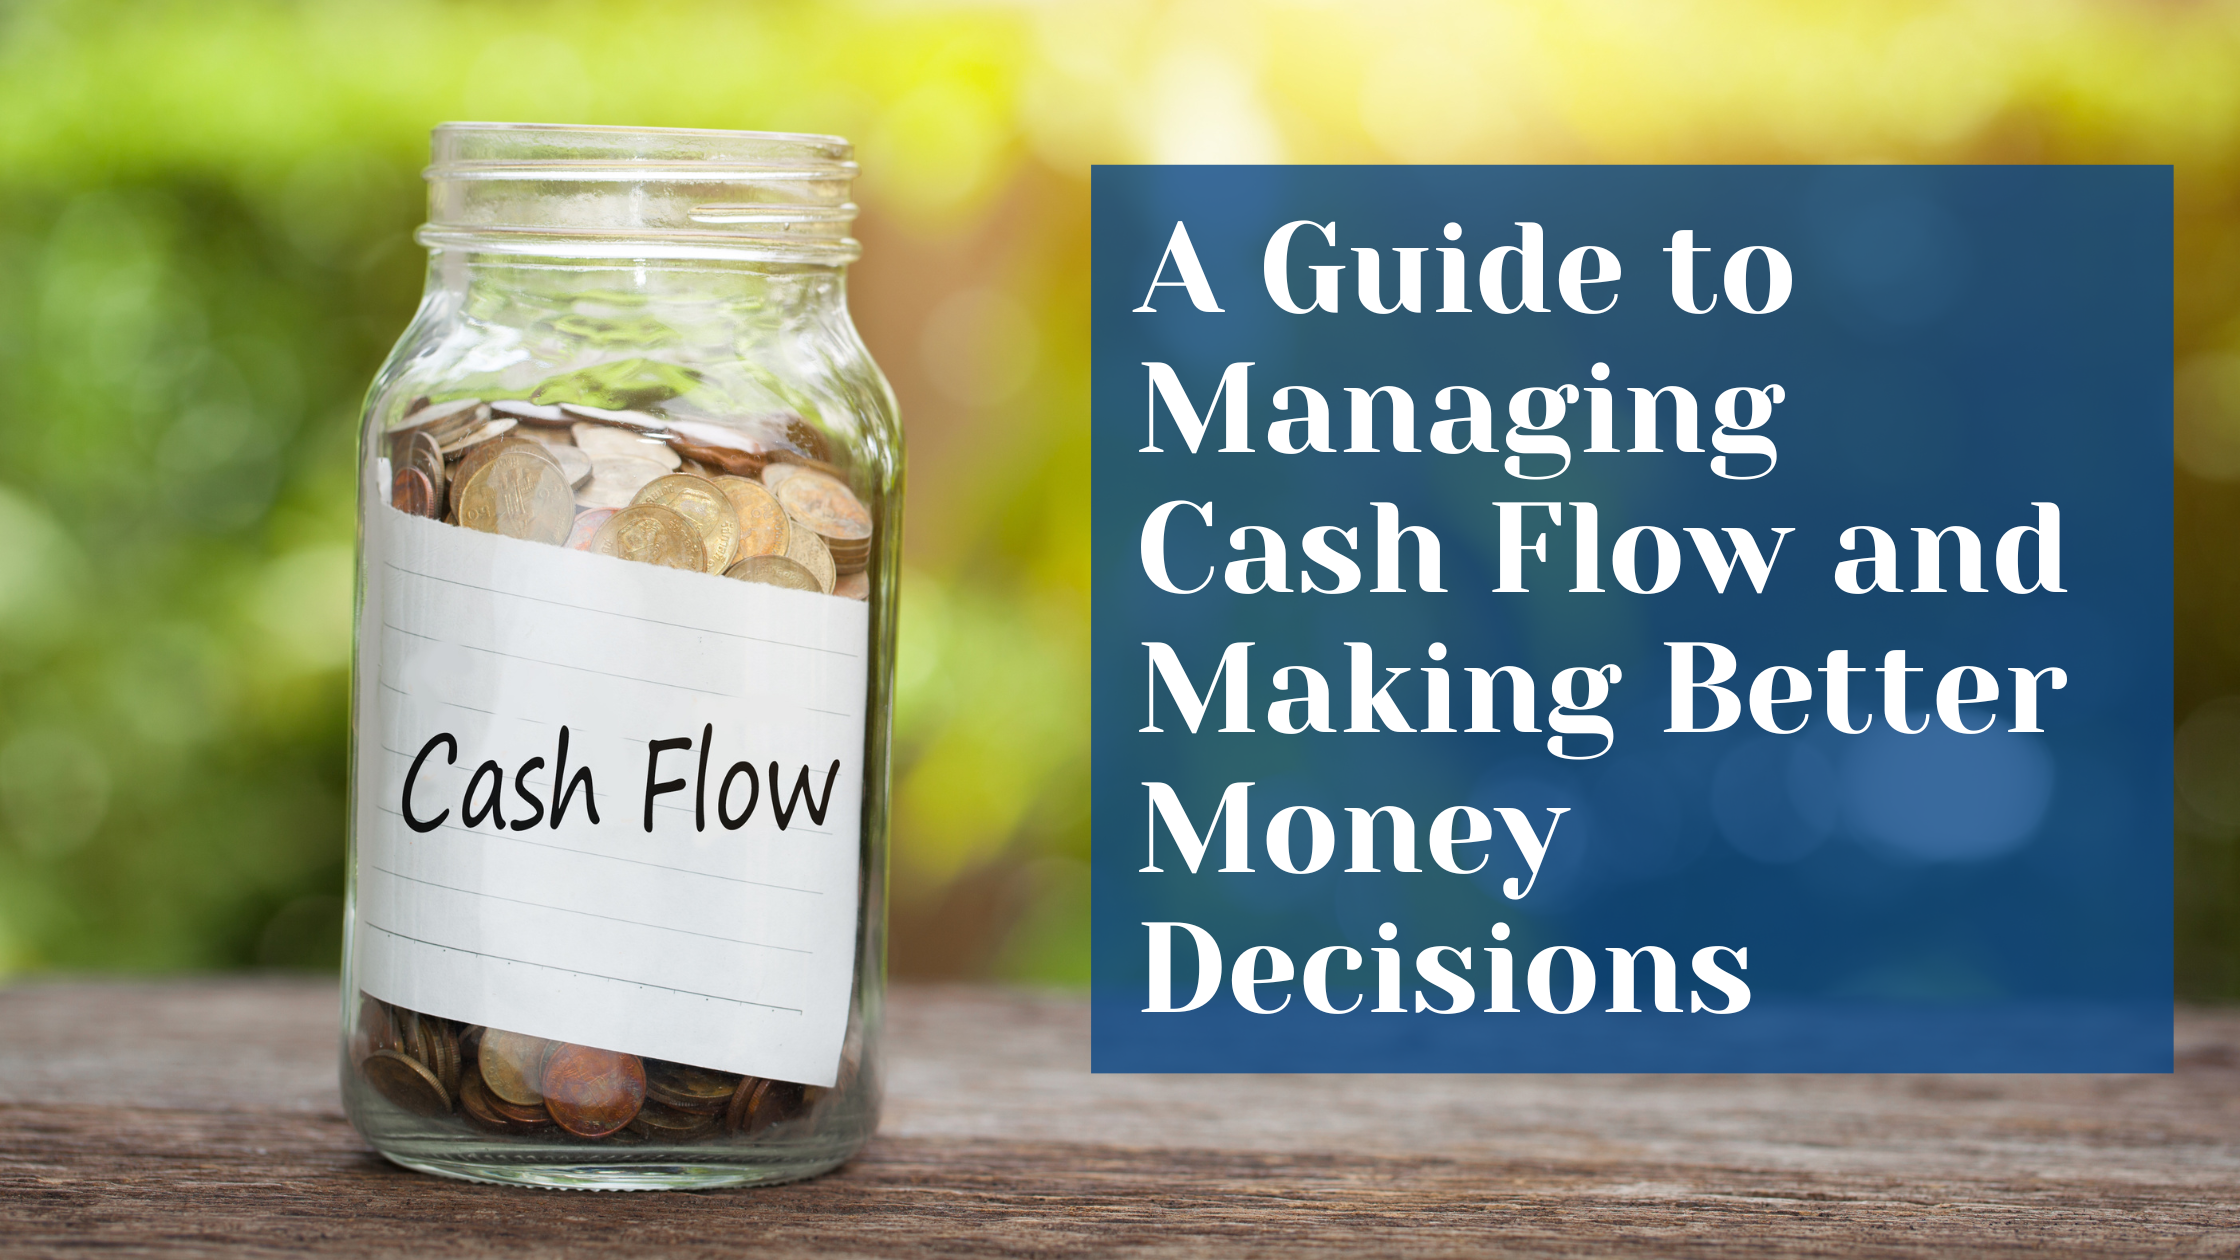 A Simple Guide to Managing Cash Flow and Making Better Money Decisions